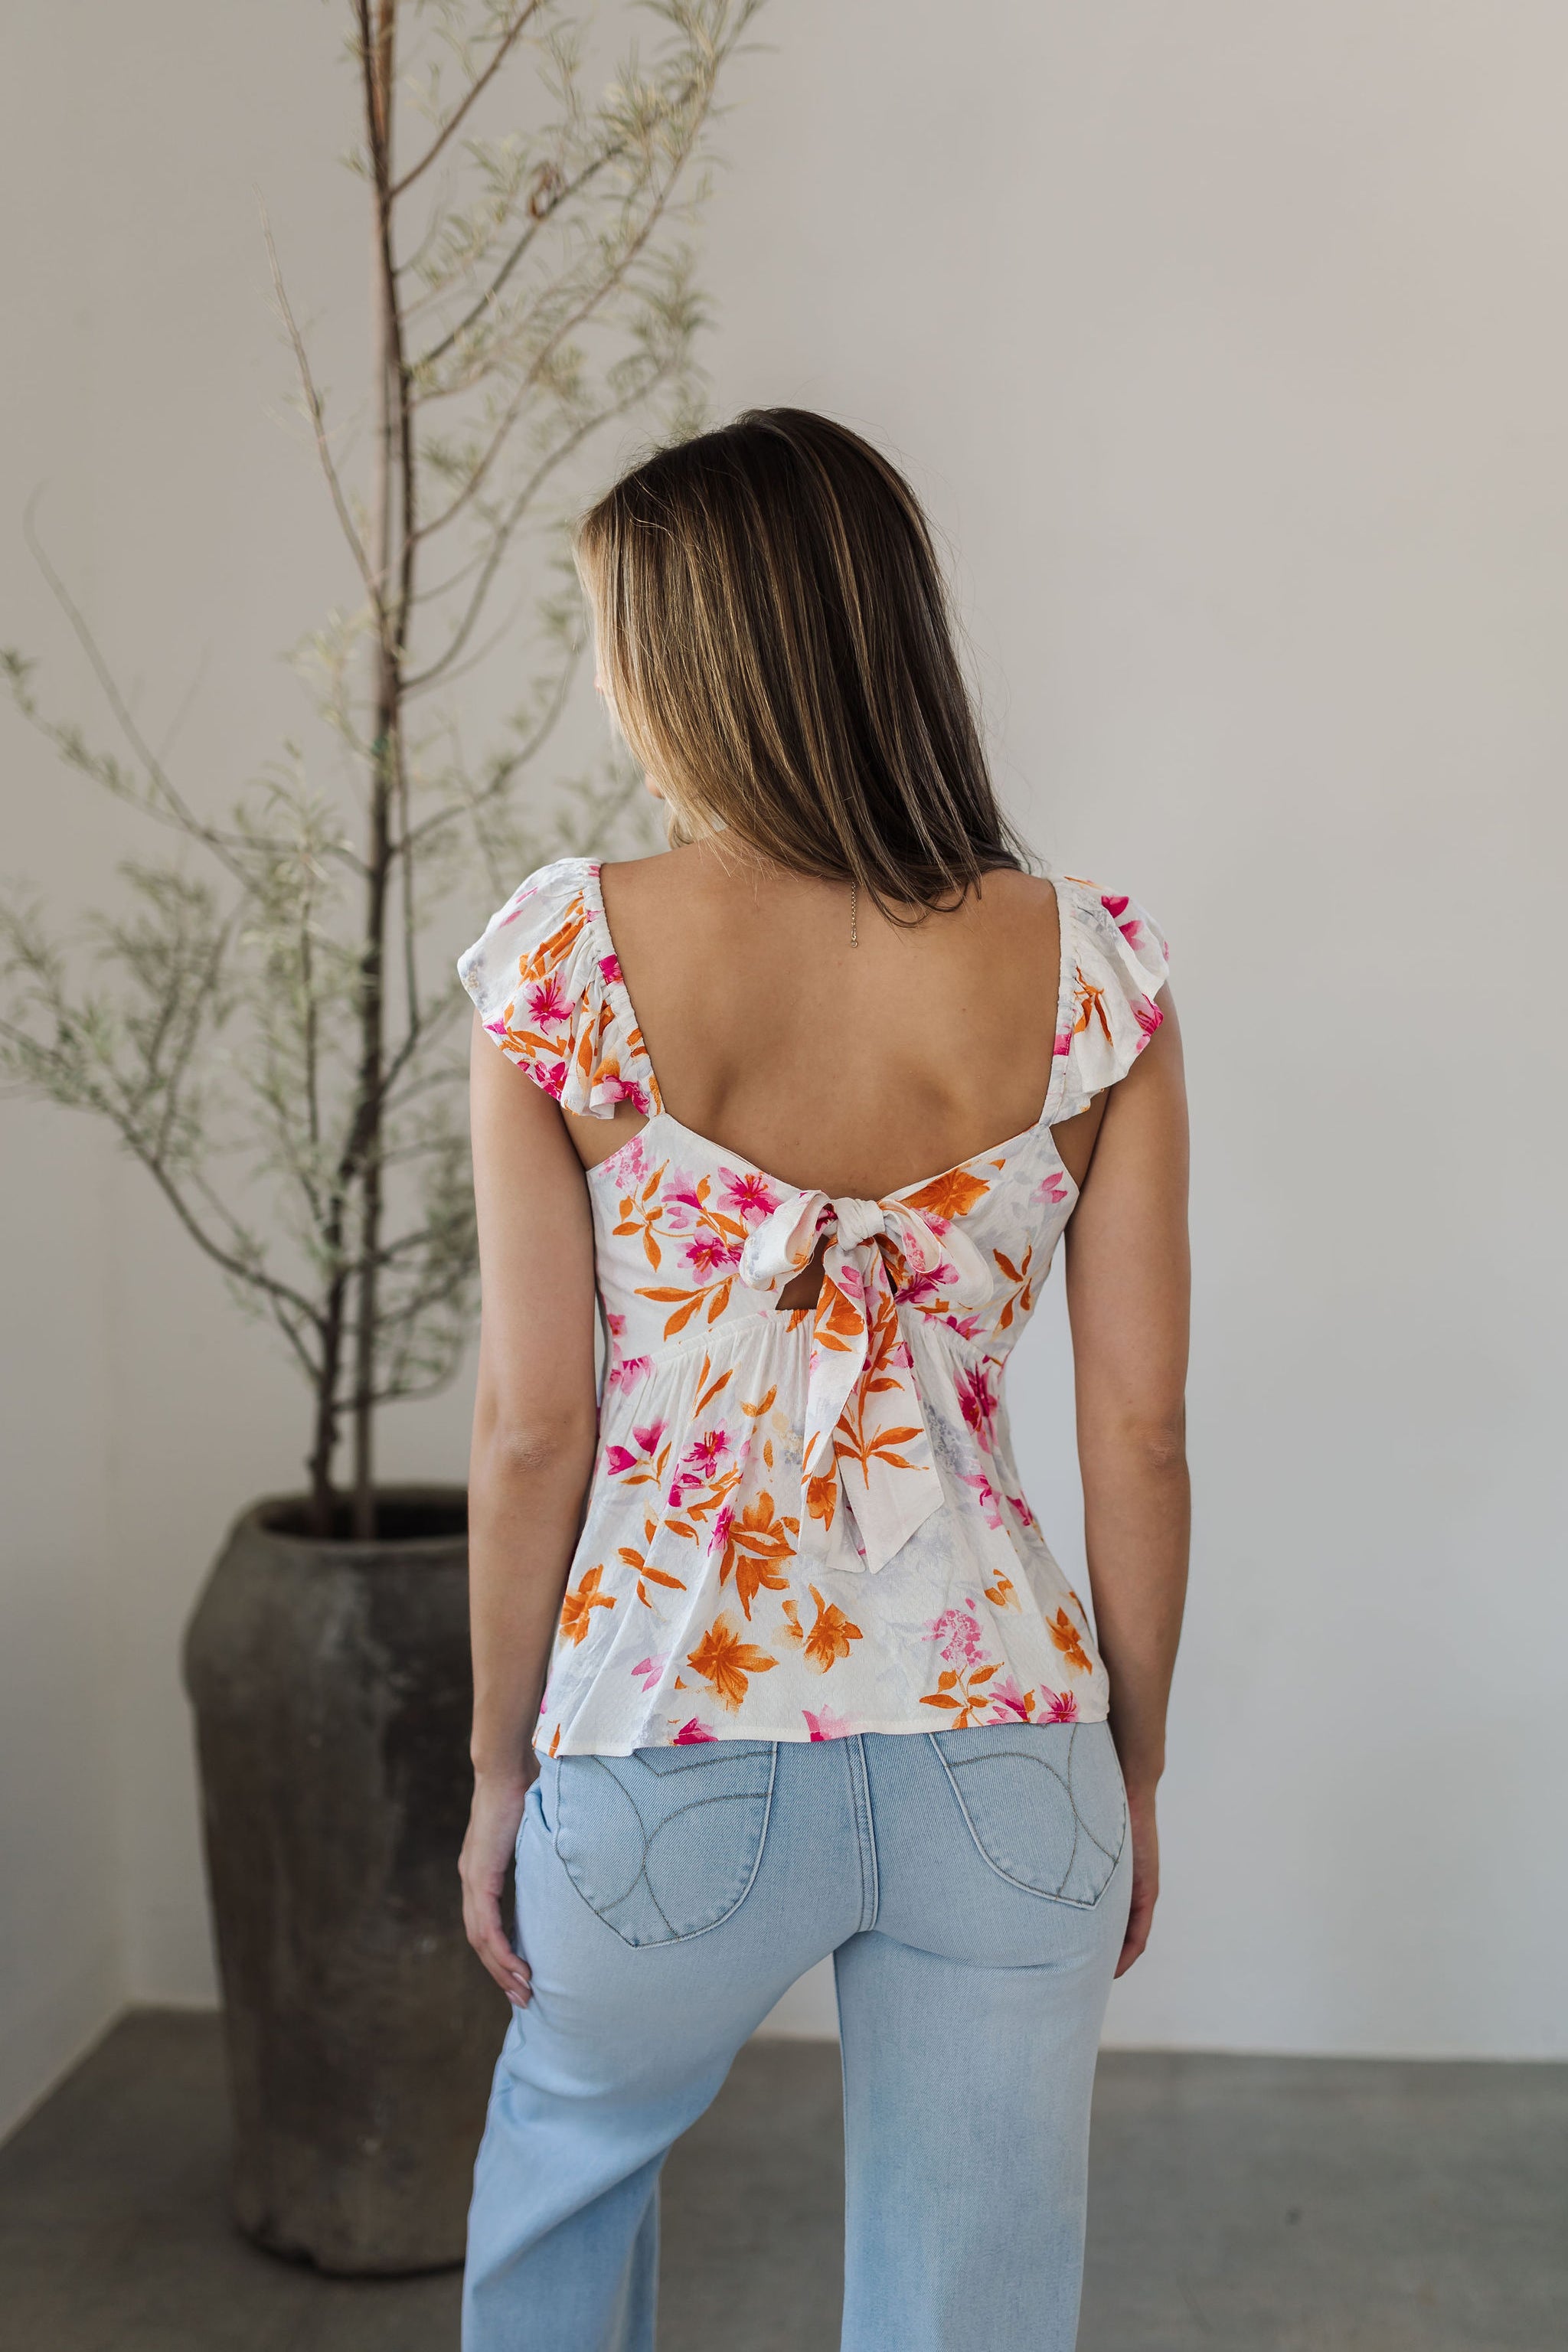 Rear view of Azalea Tie Back Tank Top with flutter straps, tie back closure, and neon floral print. 